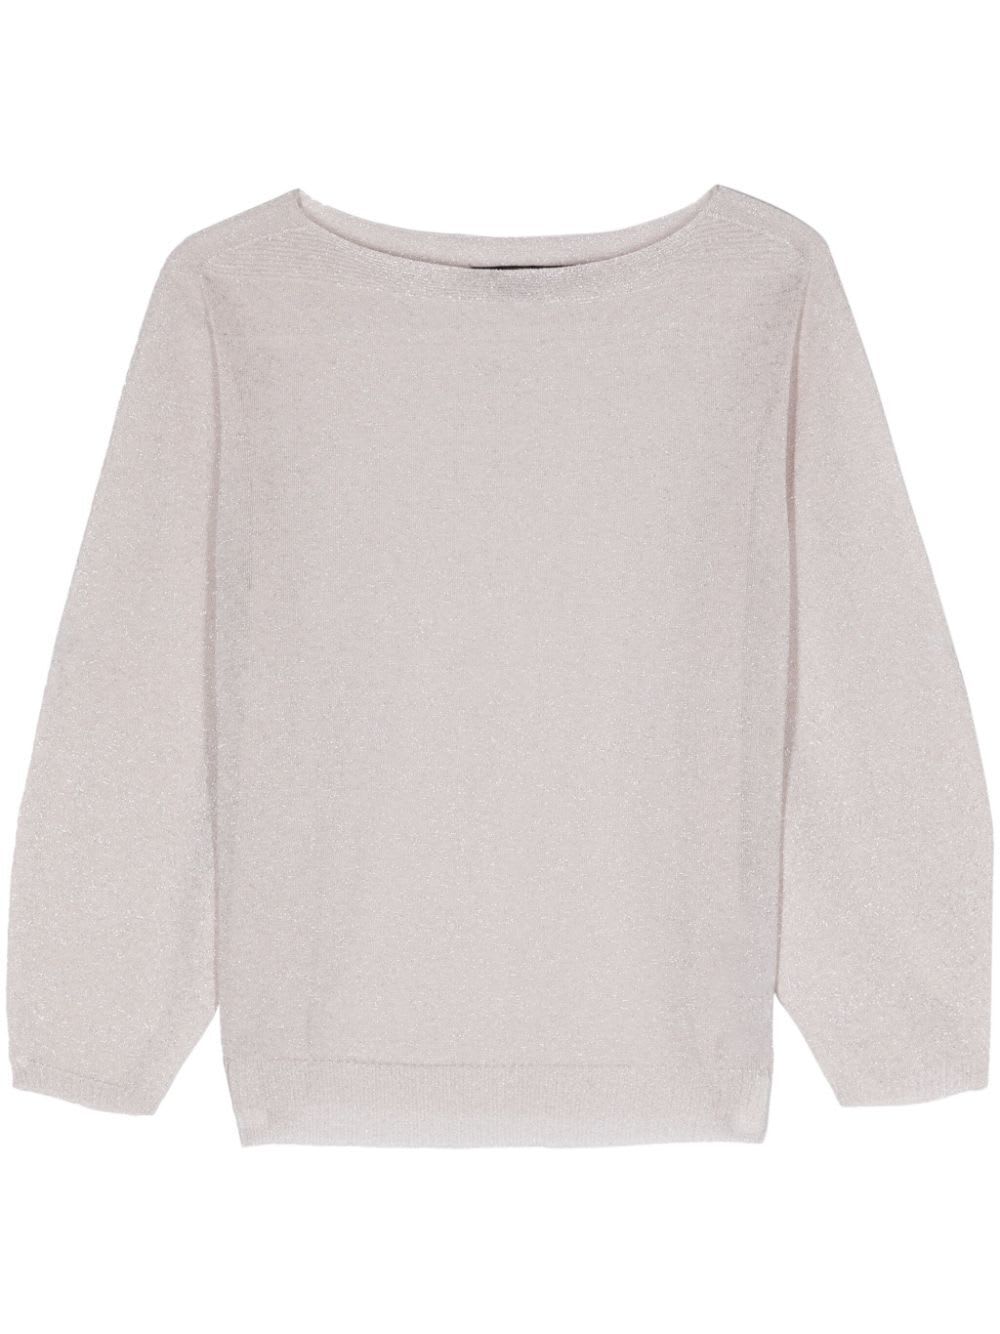 Long Sleeves Boat Neck Sweater